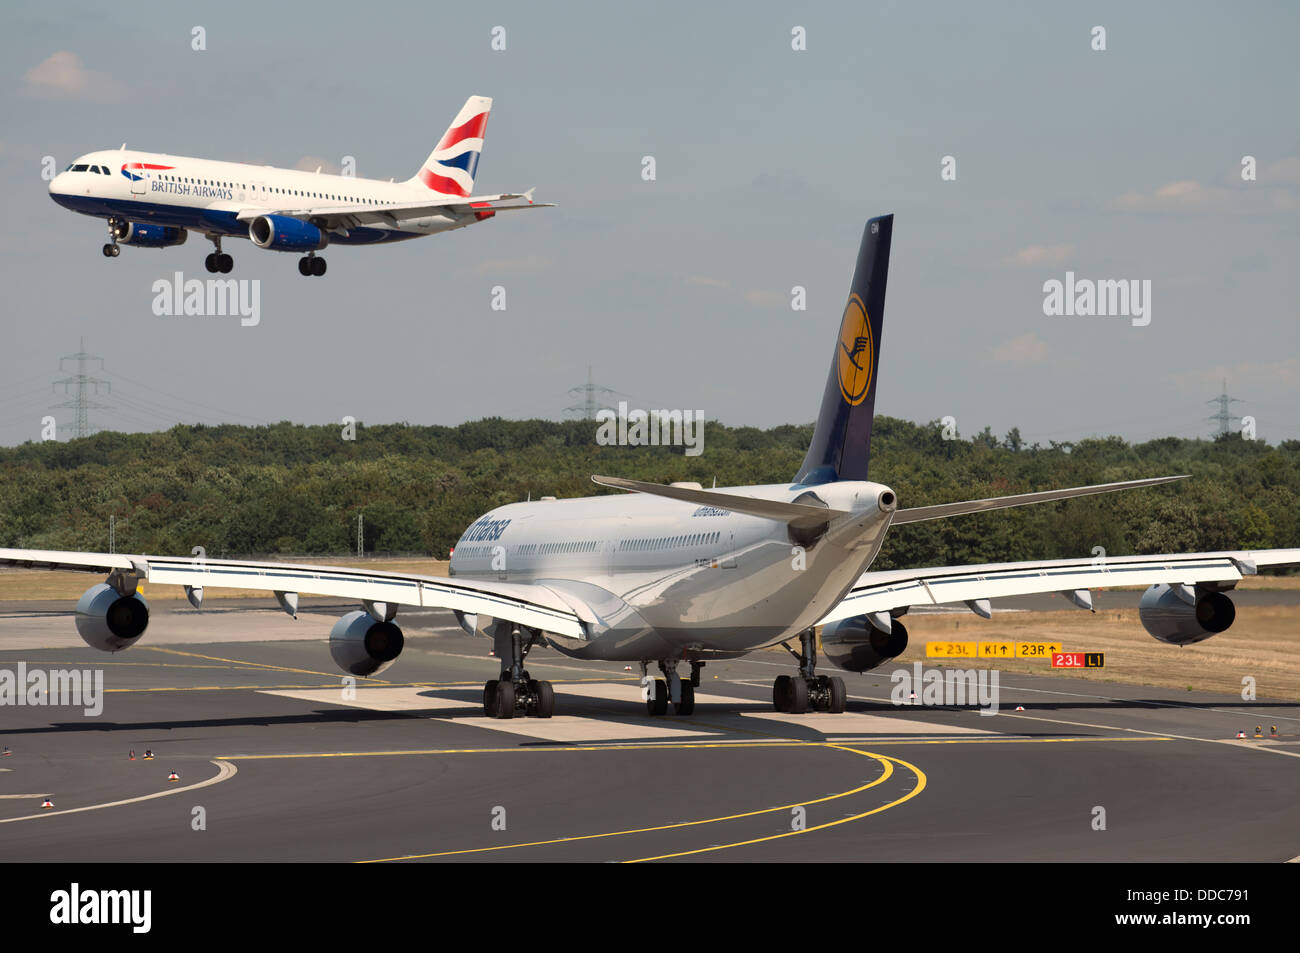 Lufthansa Airbus A340-300 waiting to take-off at Dusseldorf International airport, Germany. Stock Photo